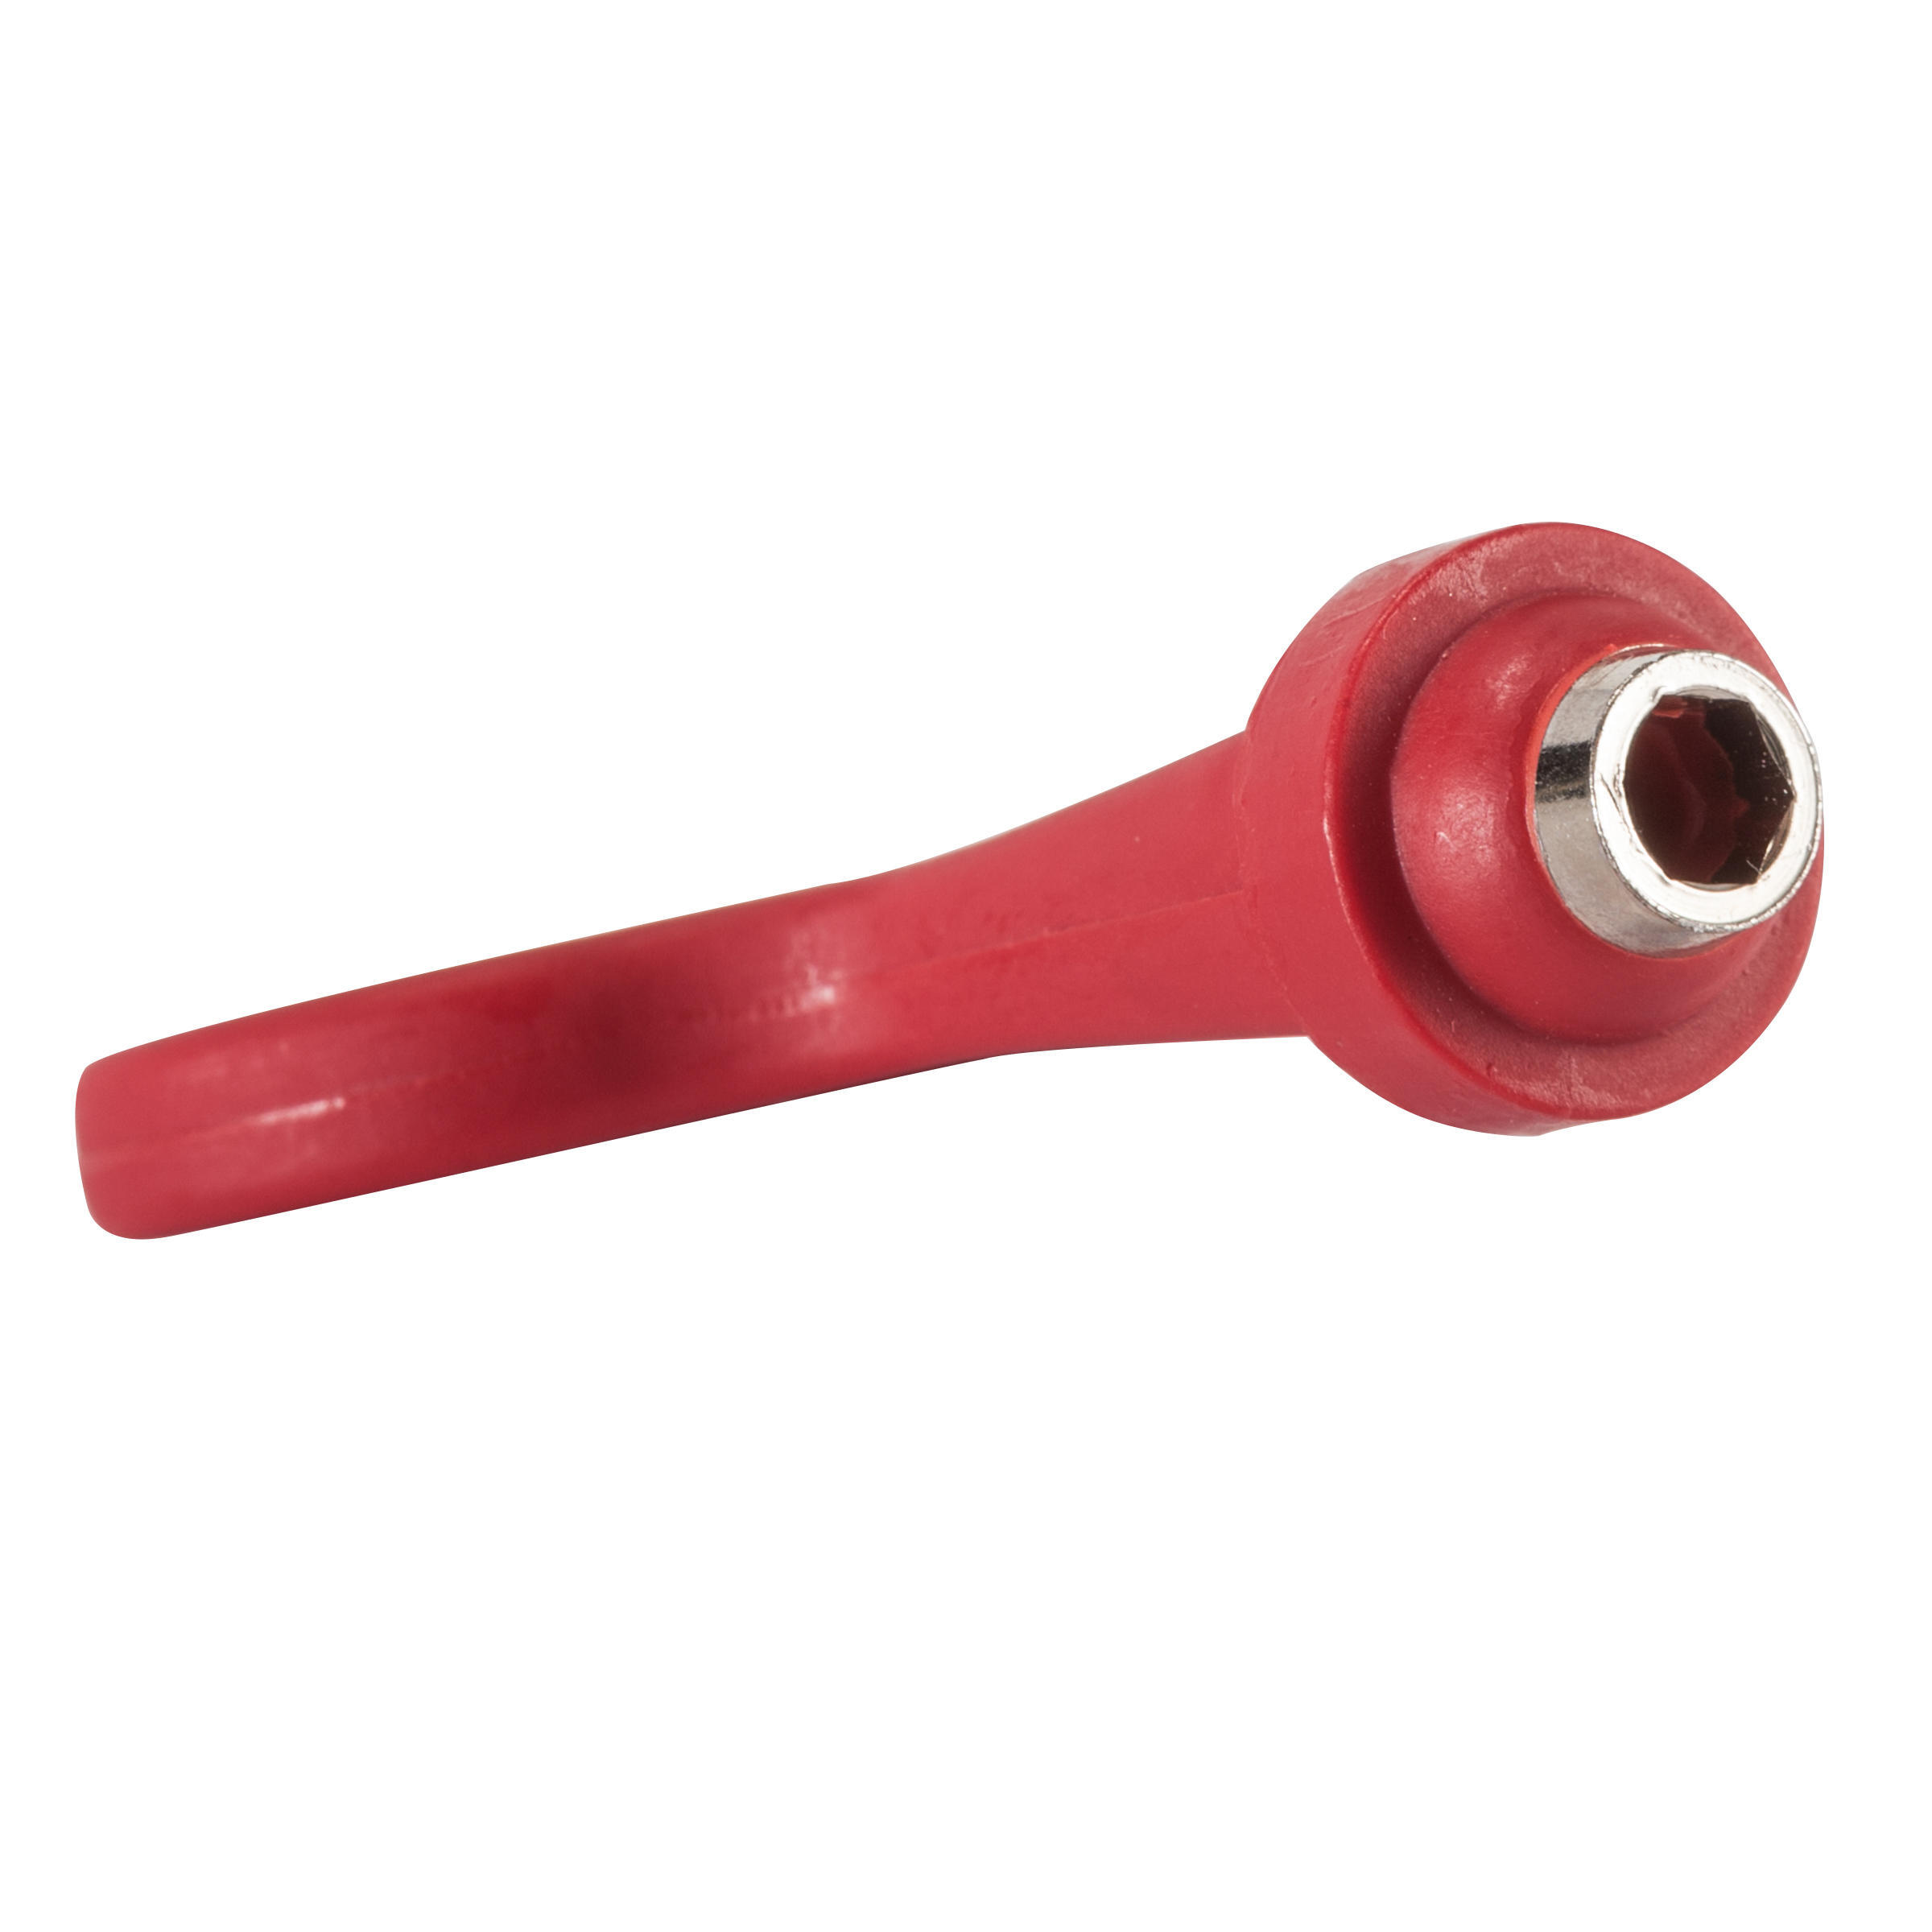 ATHLETICS SHOES HEX SPIKE WRENCH 2/7